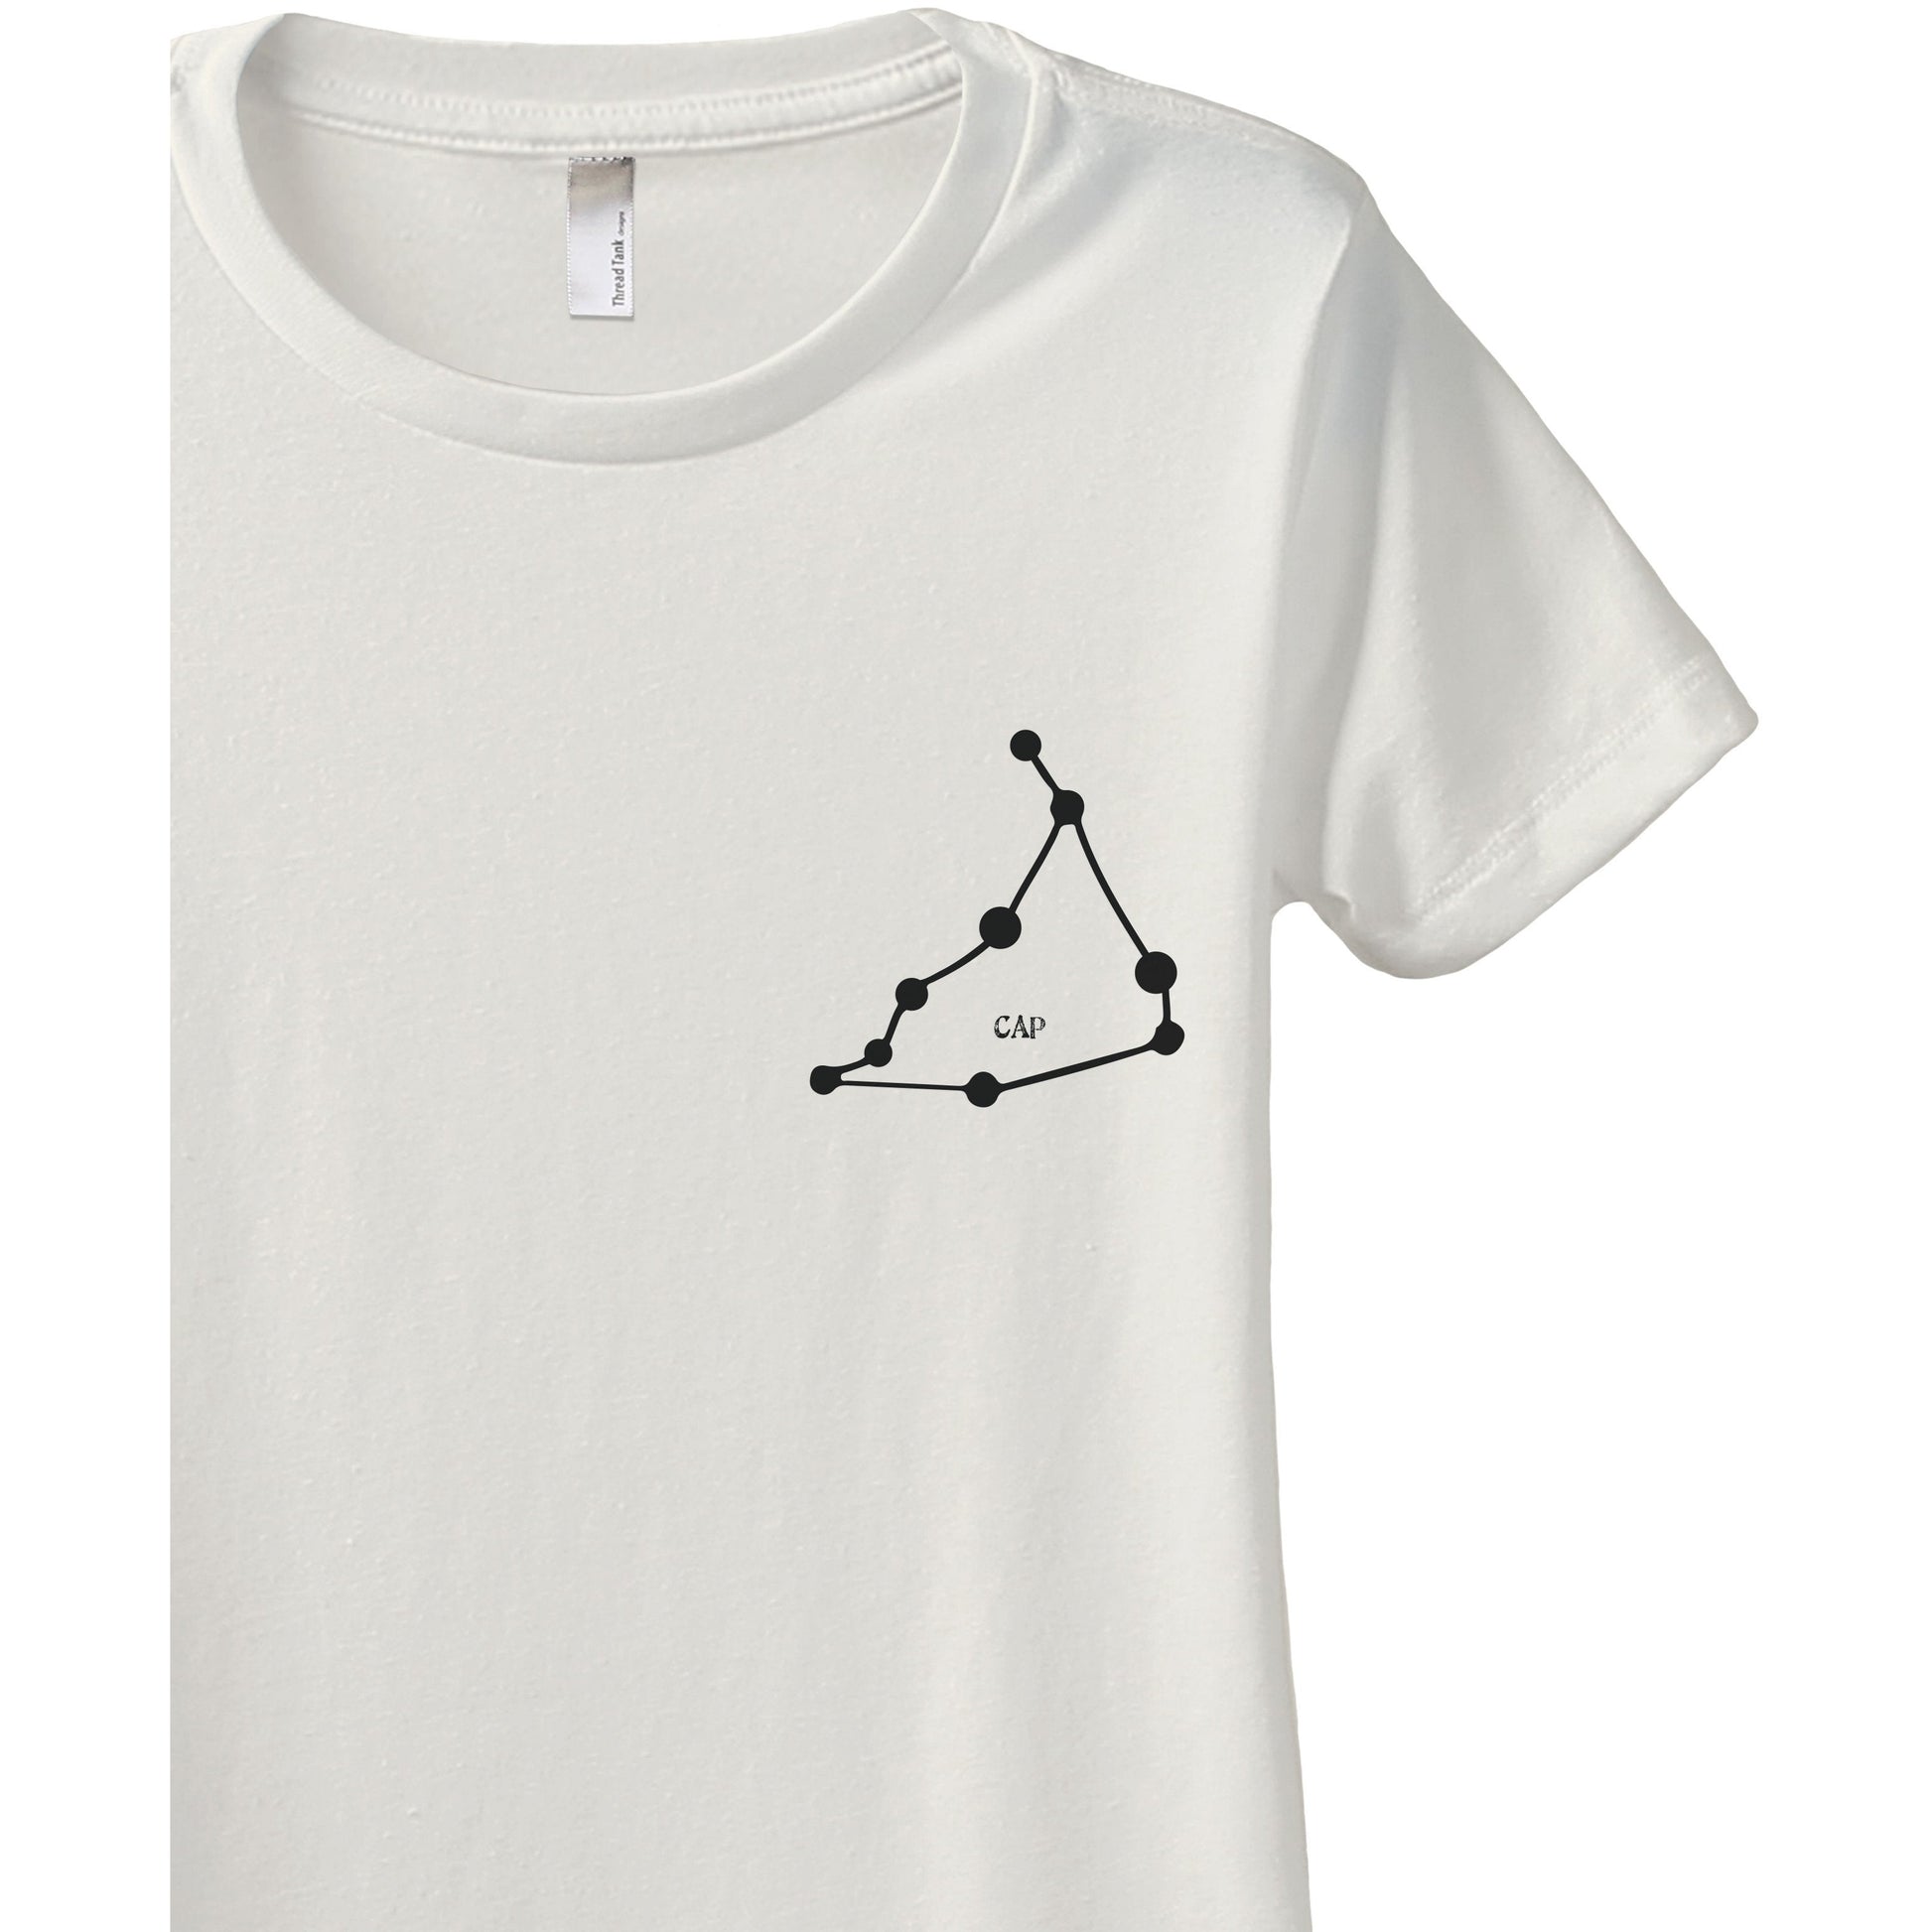 Capricorn CAP Constellation Astrology Women's Relaxed Crewneck T-Shirt Top Tee Vintage White Zoom Details
